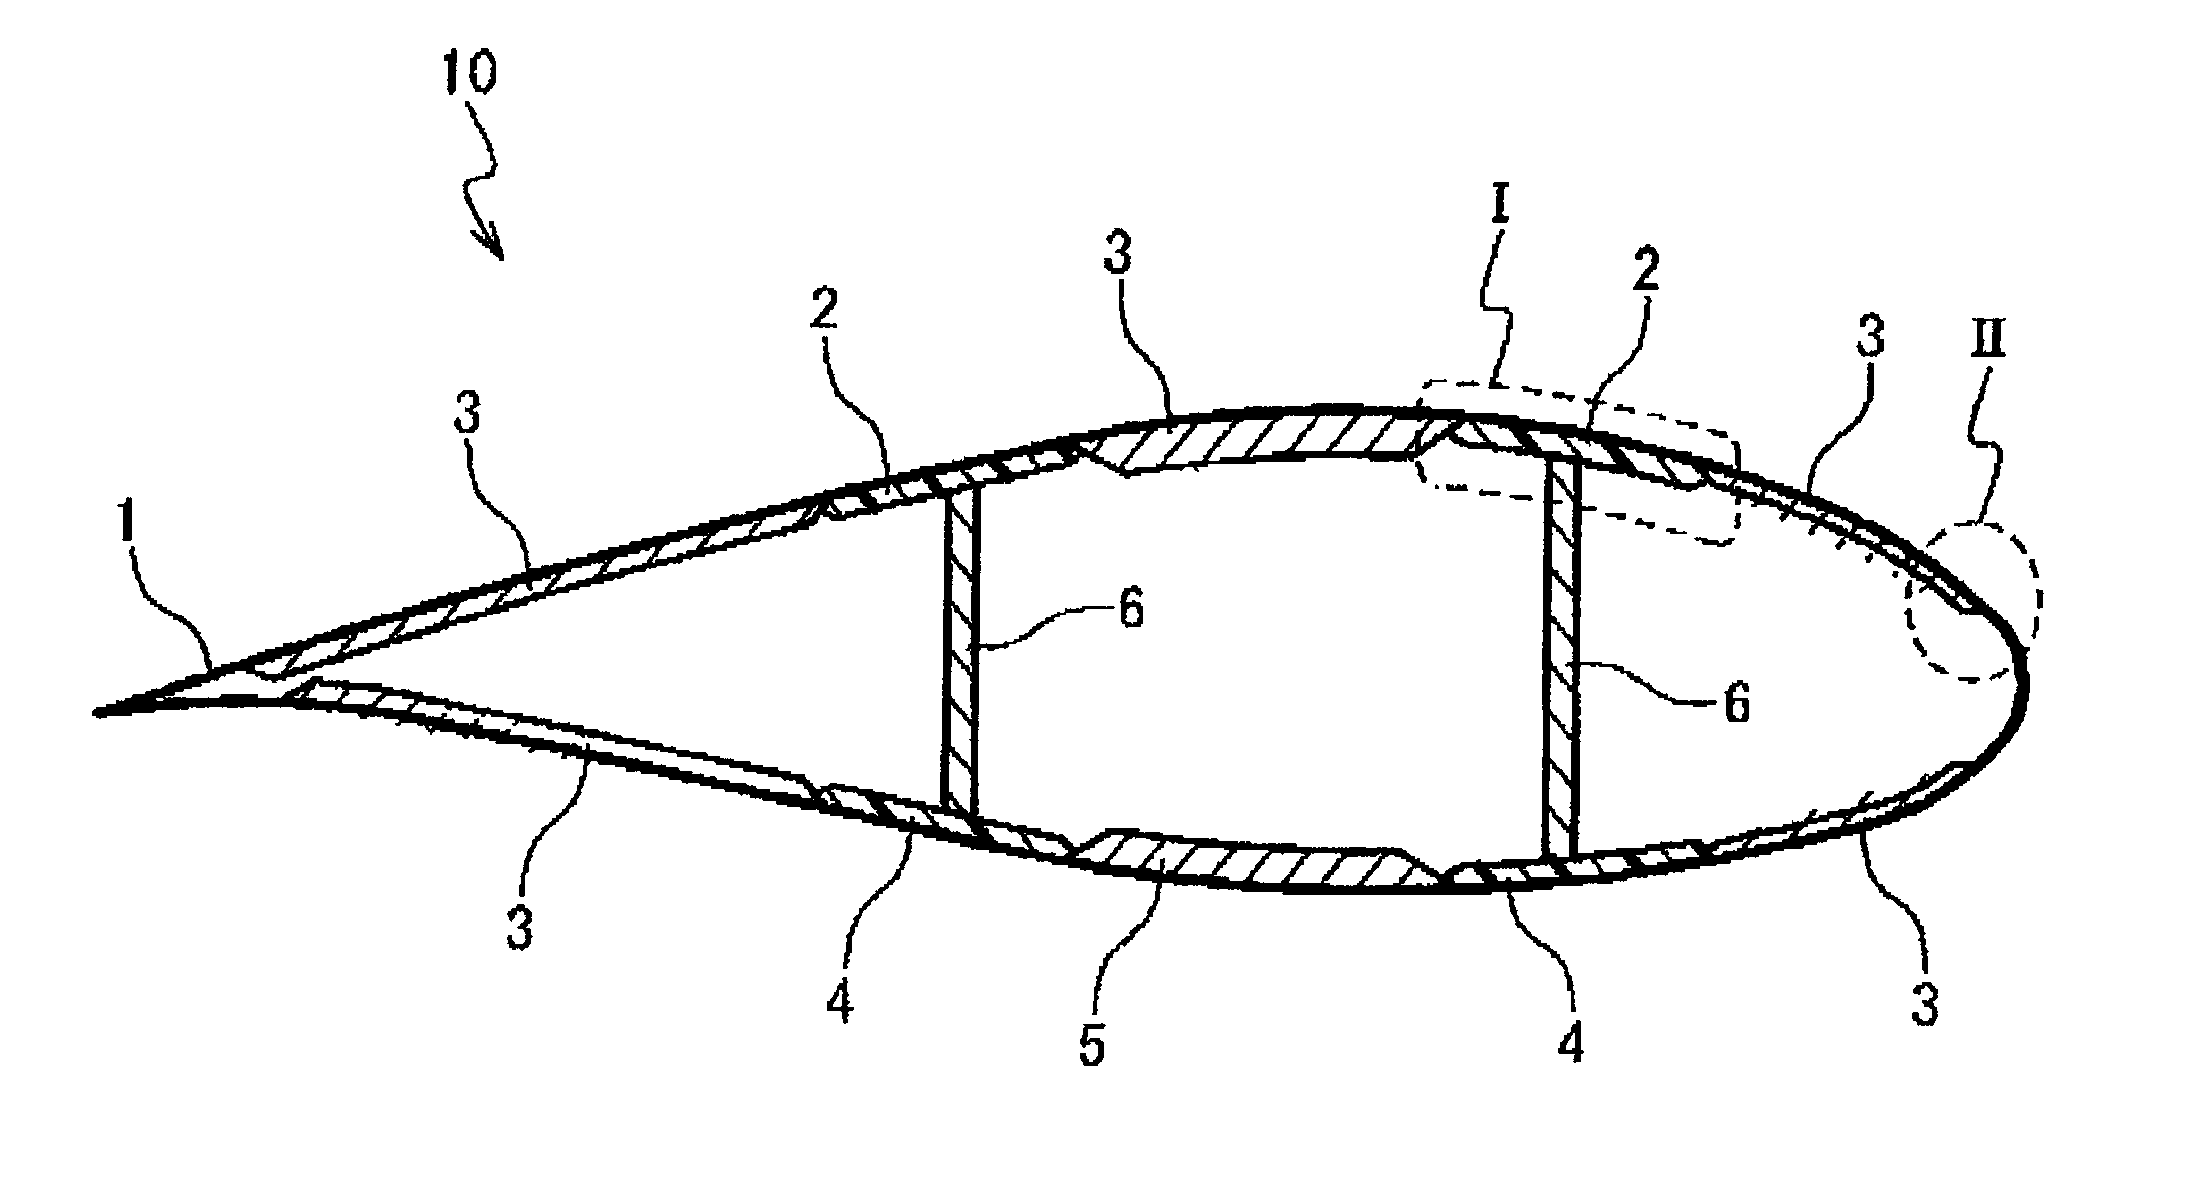 Wind turbine blade with sufficiently high strength and light weight